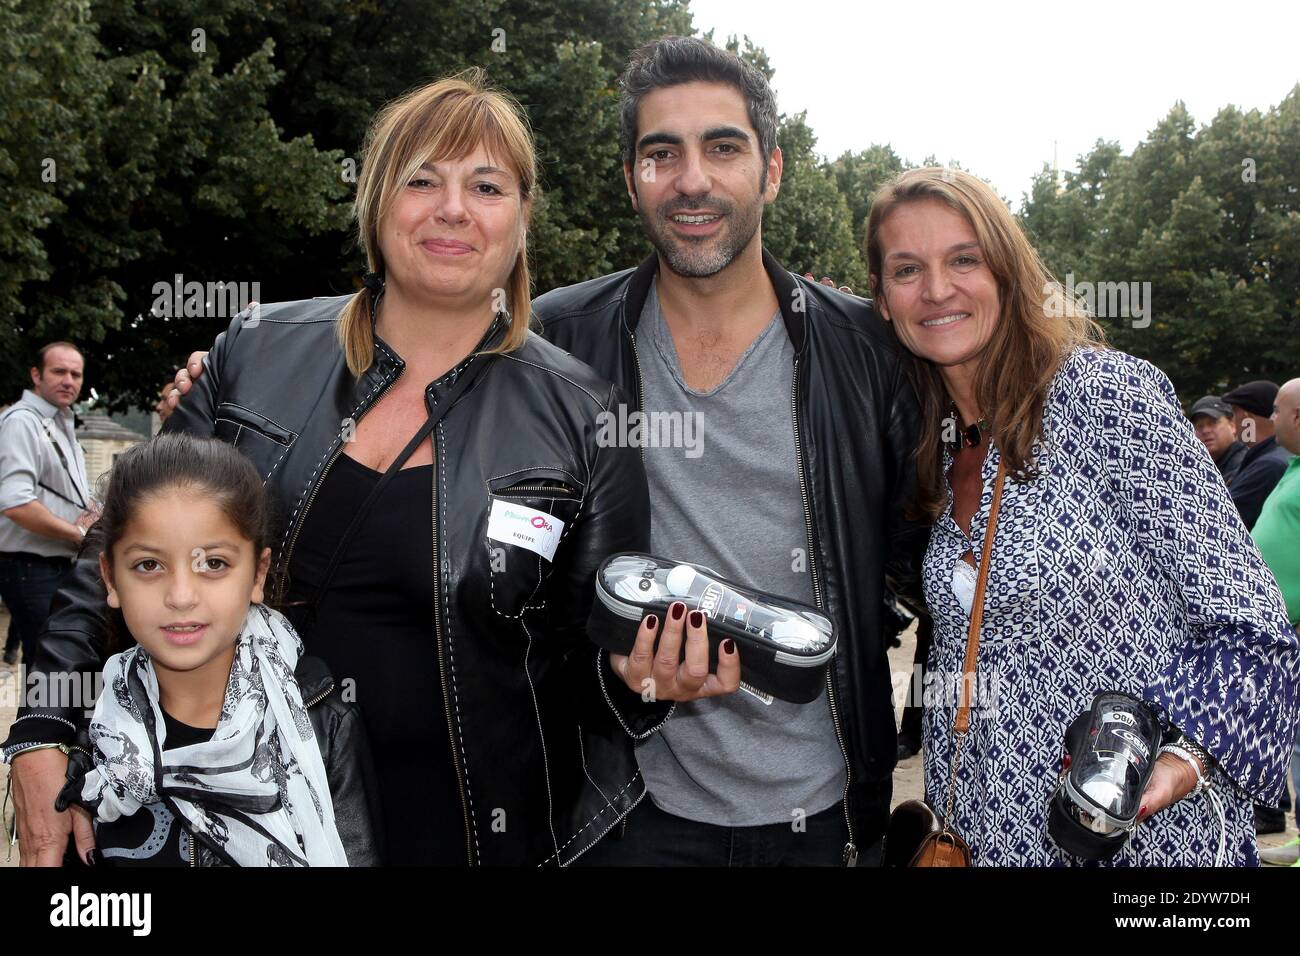 Michelle Bernier, Ary Abittan and Martine Boukobza attending The Petanque Tournament to benefit the association 'Meghanora' held at Place des Invalides in Paris, France, on September 29, 2013. Photo by Audrey Poree/ABACAPRESS.COM Stock Photo